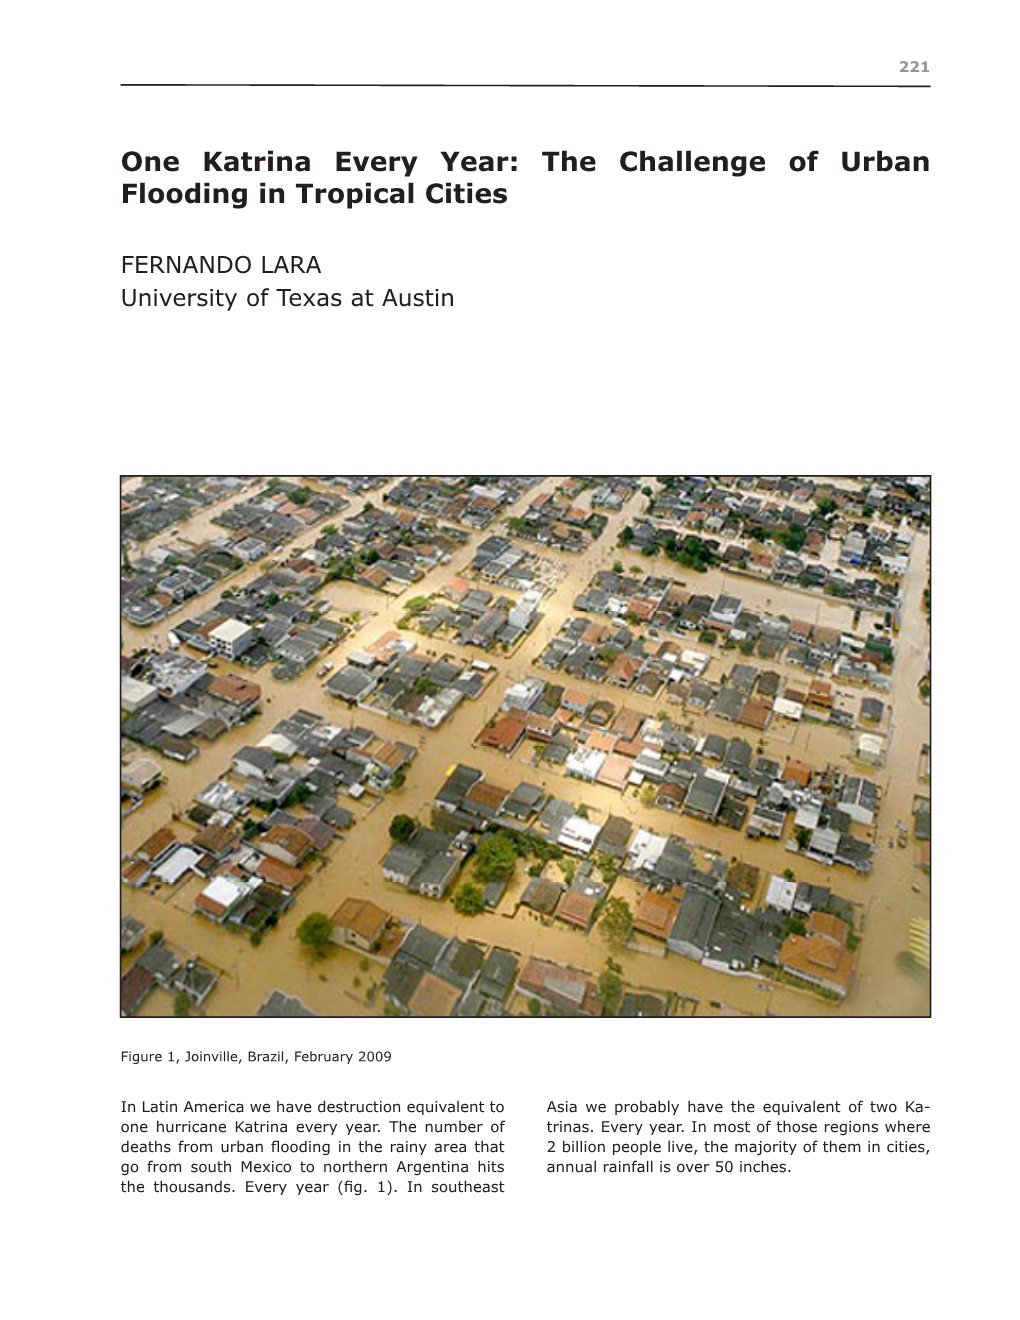 One Katrina Every Year: the Challenge of Urban Flooding in Tropical Cities